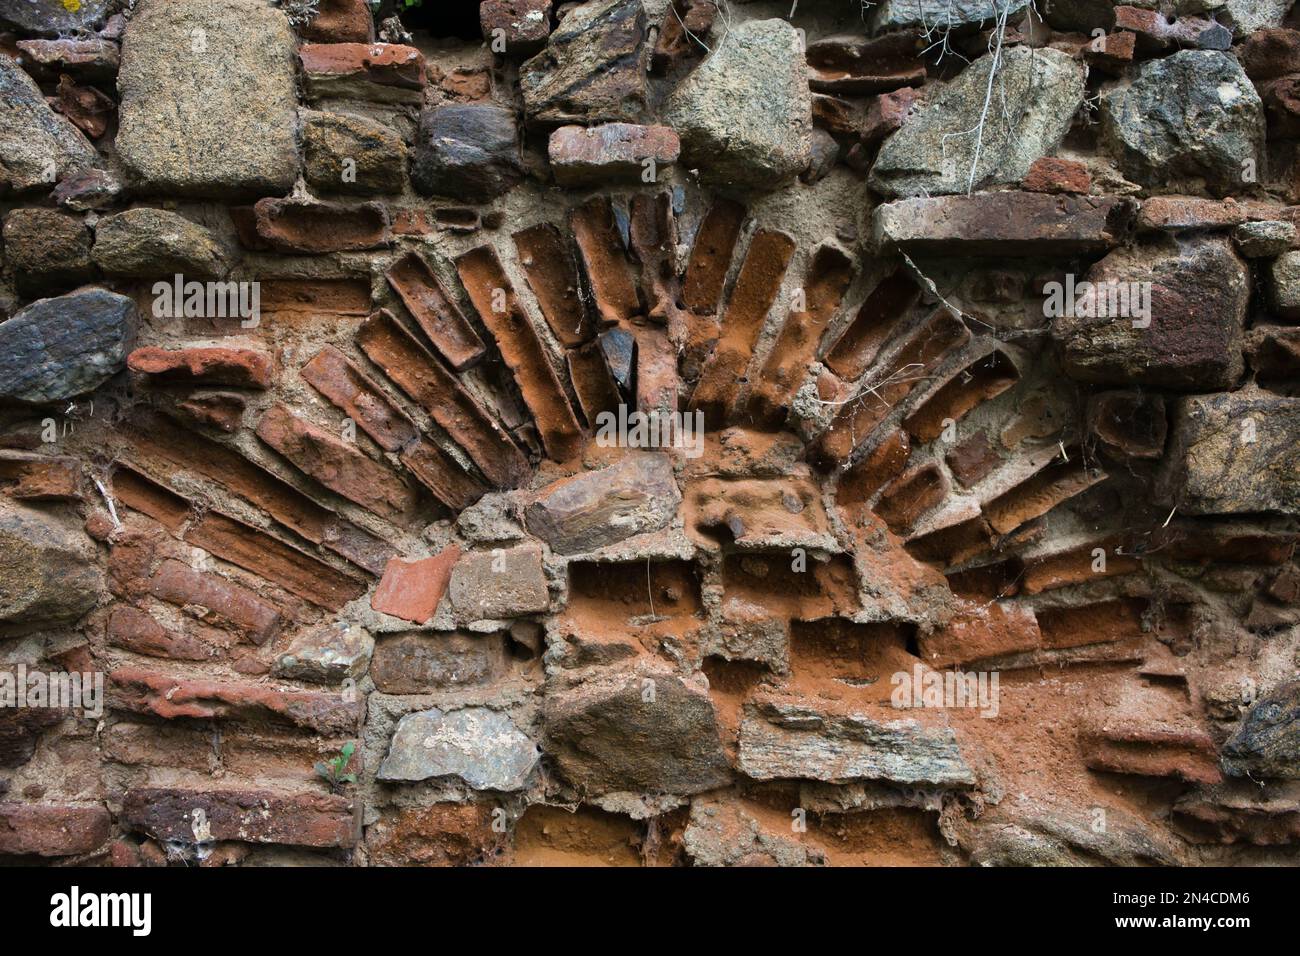 Texture of an old brick wall with an arched structure. Stock Photo